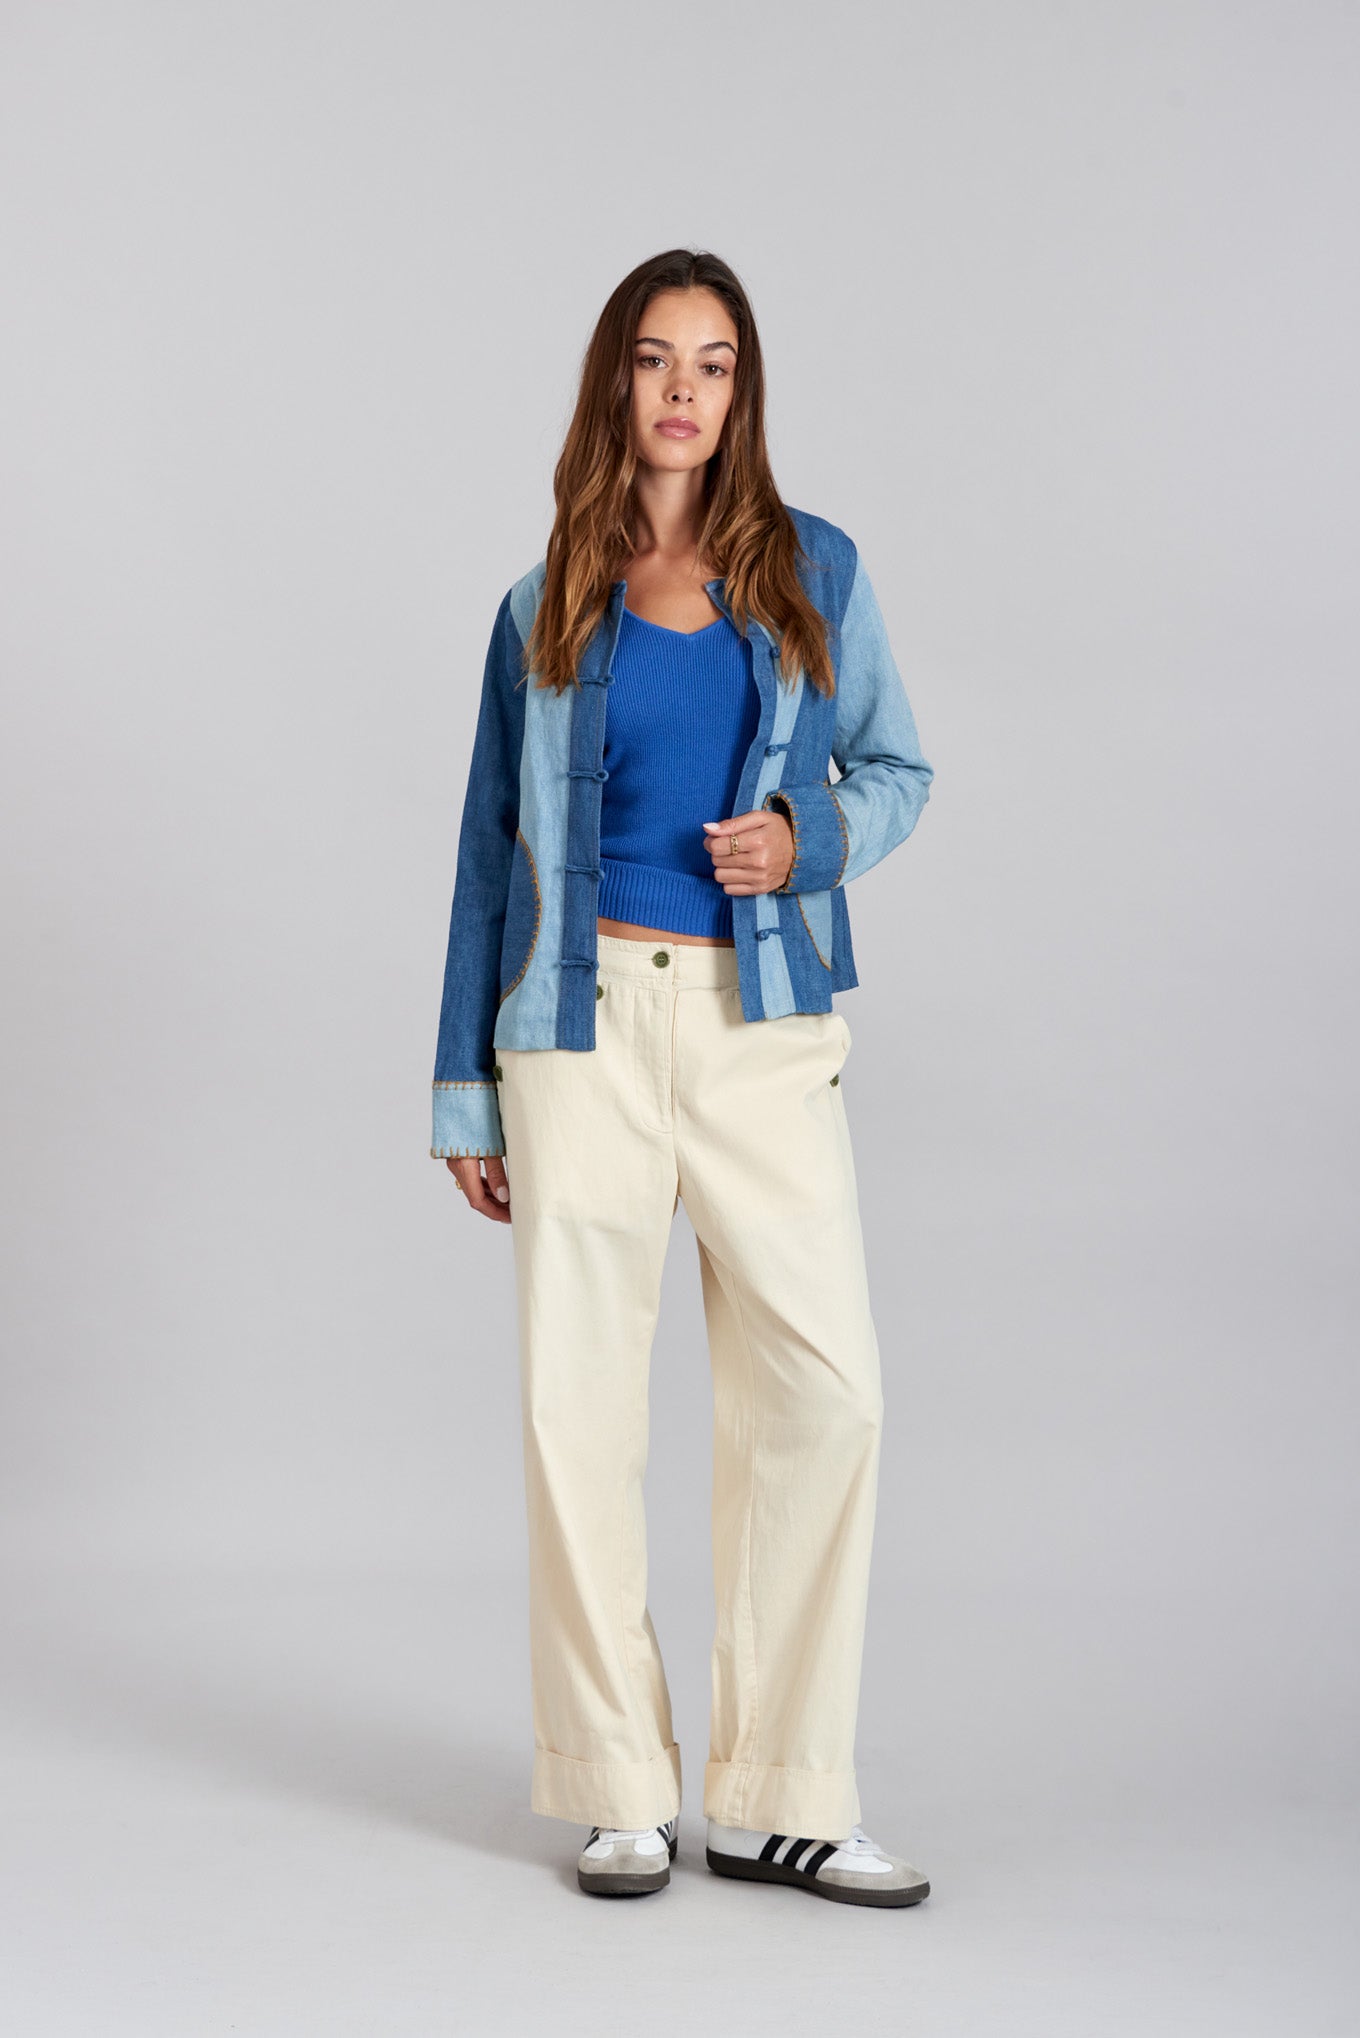 TANSY - Organic Cotton Trousers Putty